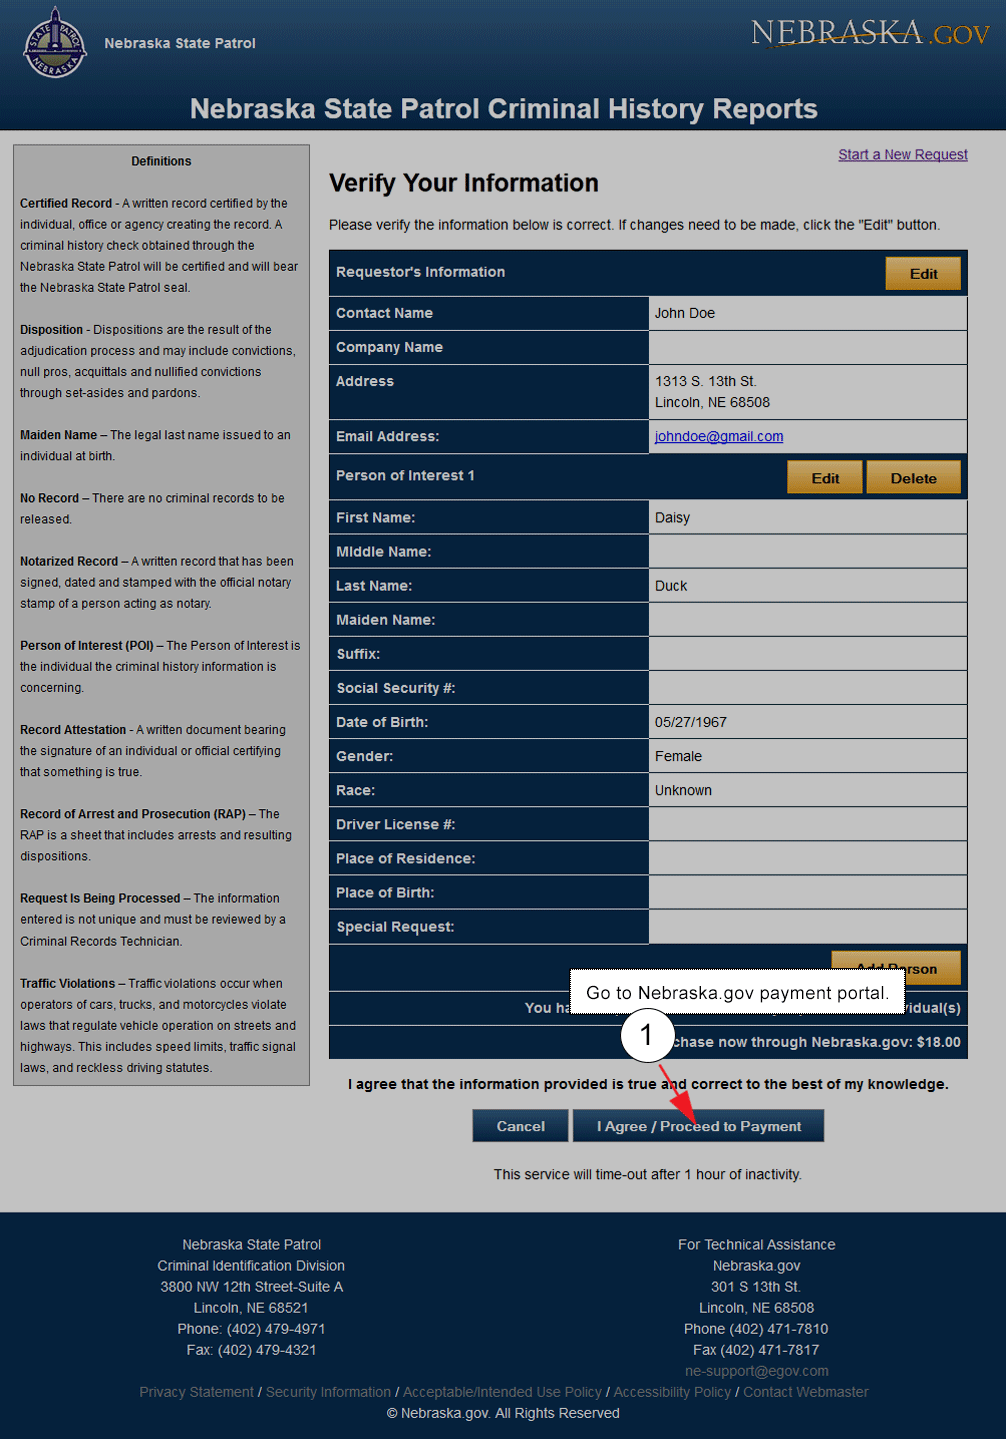 Screenshot of the request confirmation and edit page of the Criminal History Request Service